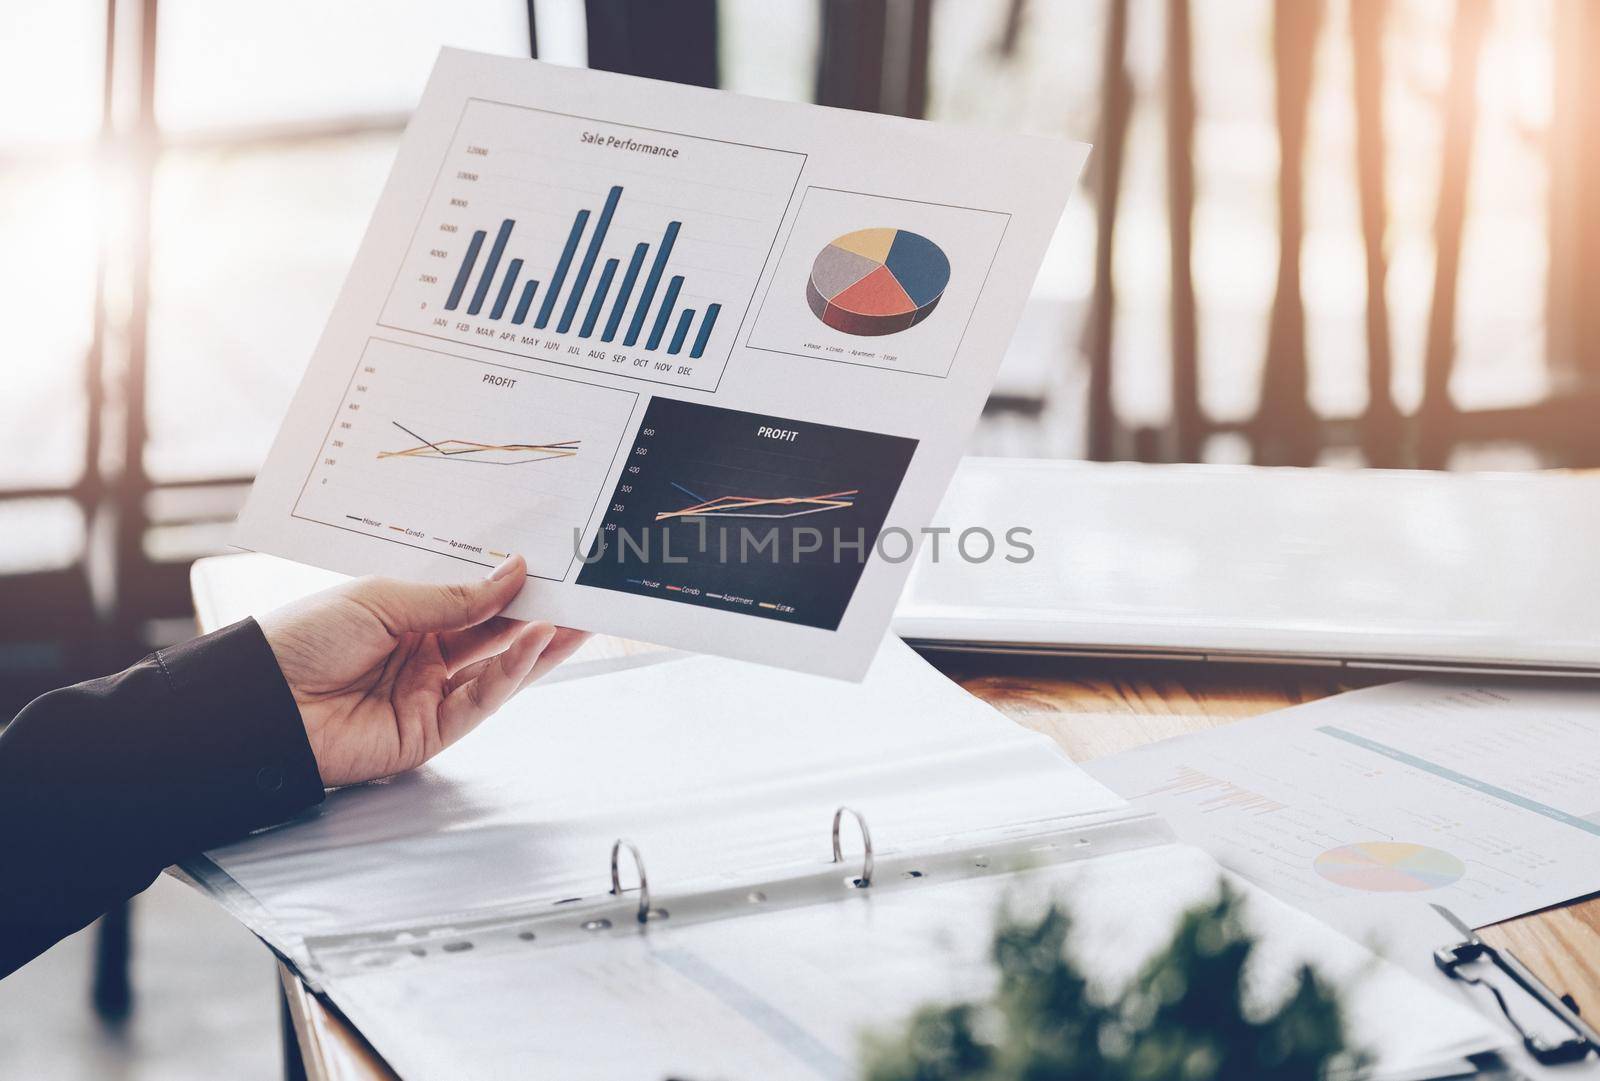 Sales Profitability Planning Ideas, Businesswomen are analyzing profitability statistical graphs from the graph document in hand to plan profits in growth from last year